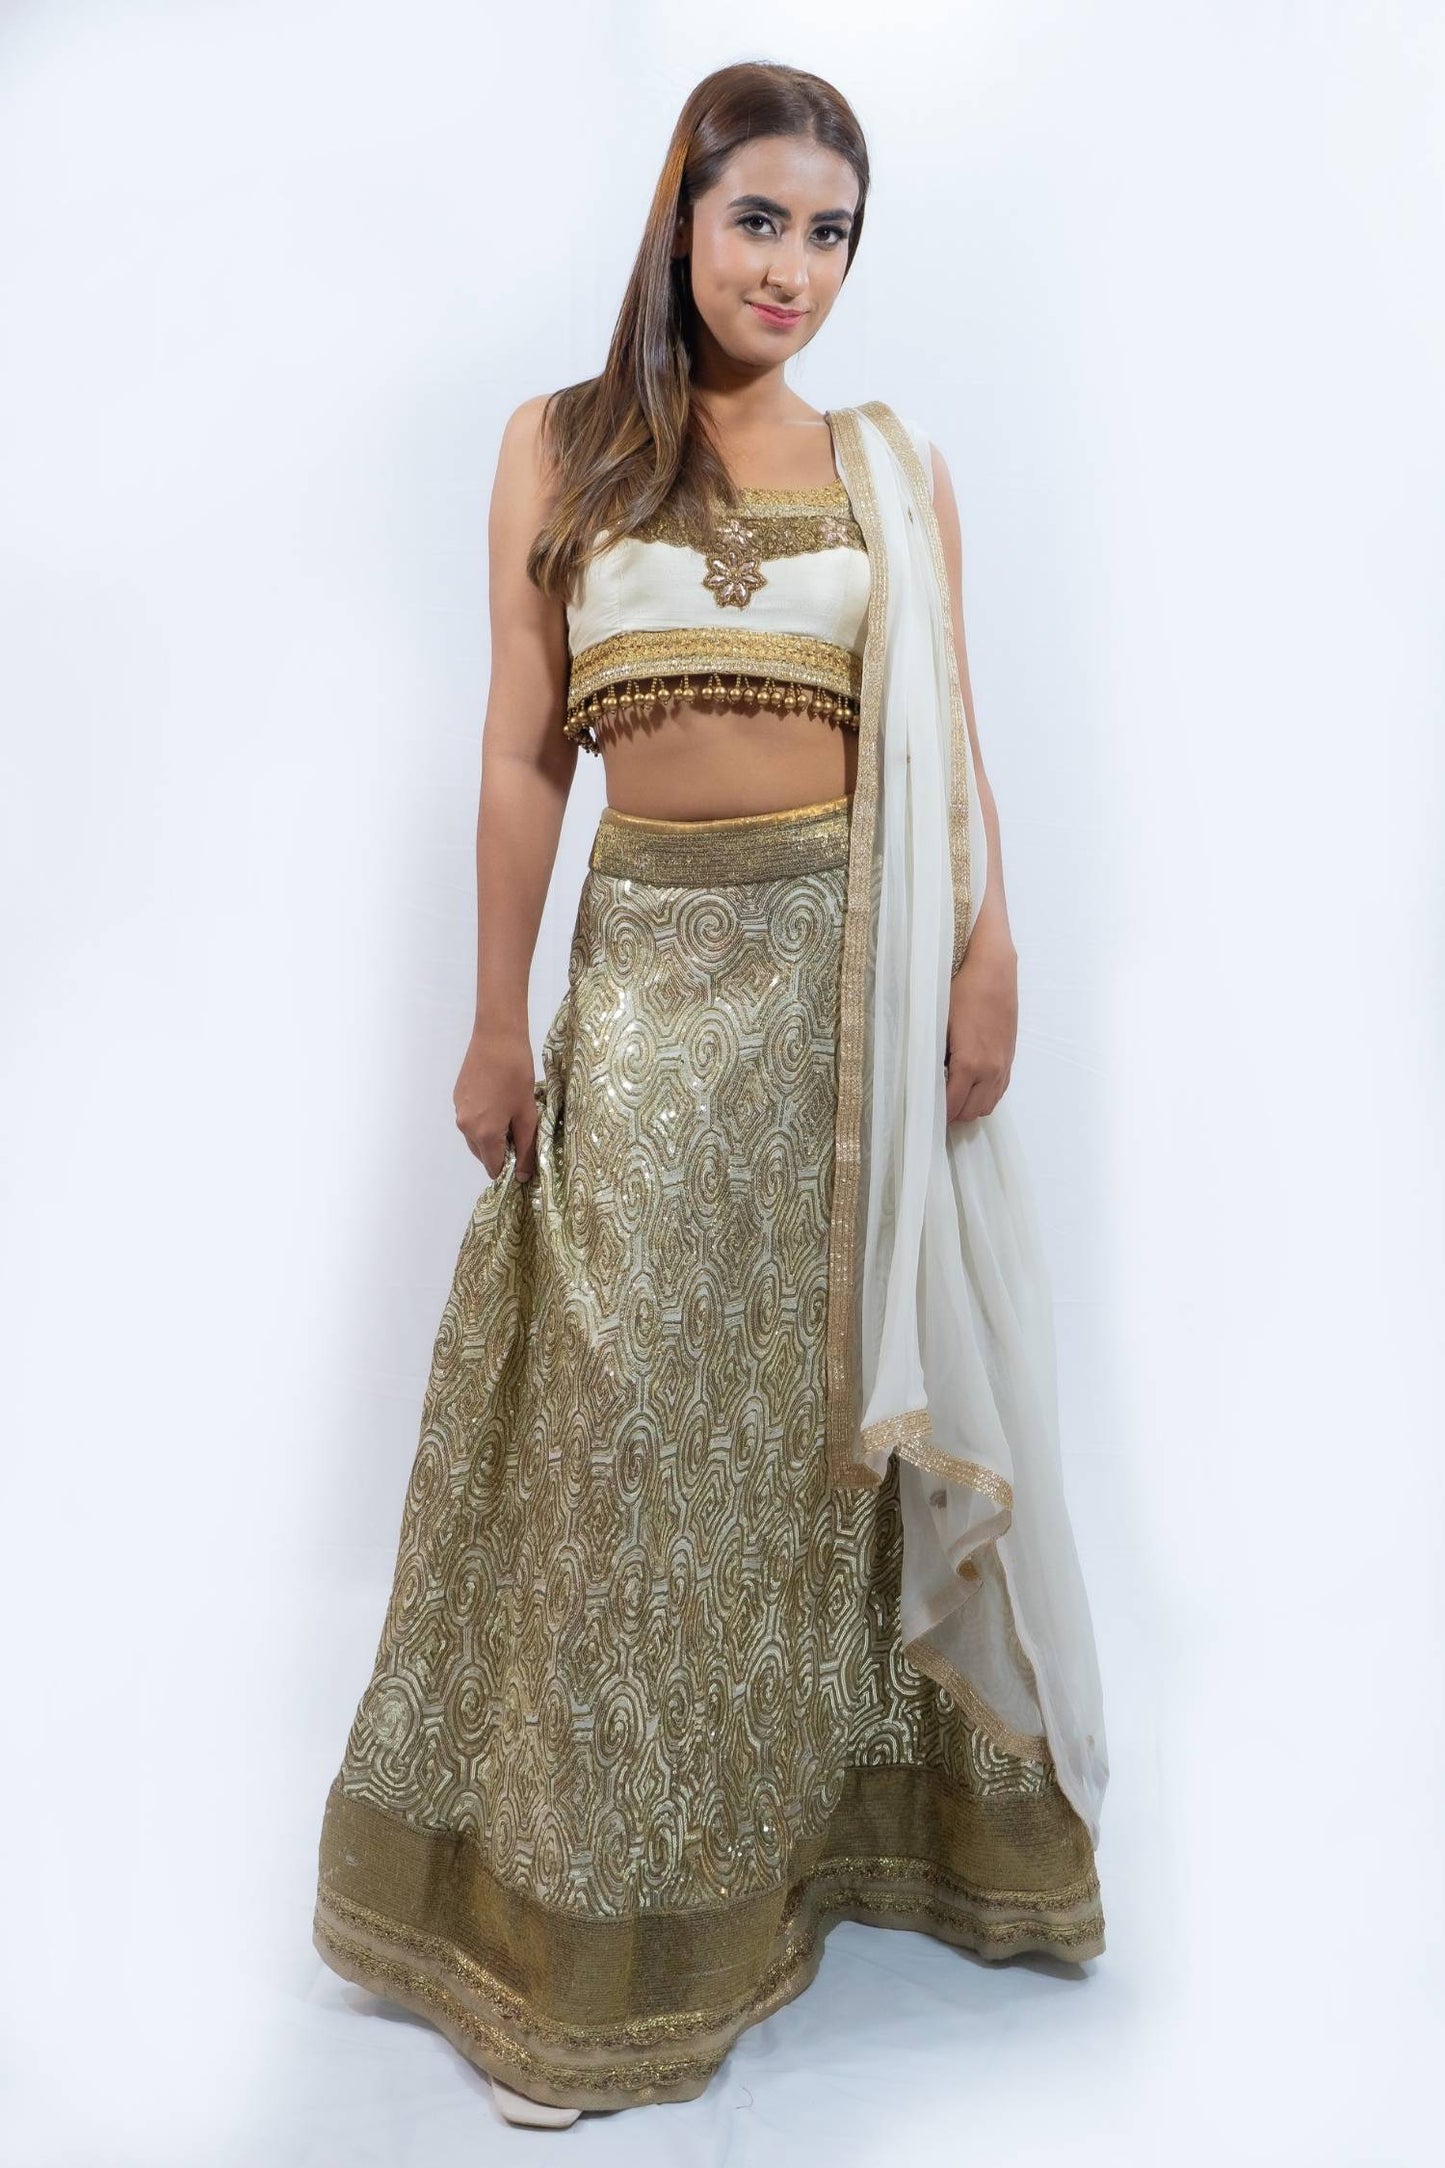 White and gold sequin lengha Indian outfit rental in Bangkok